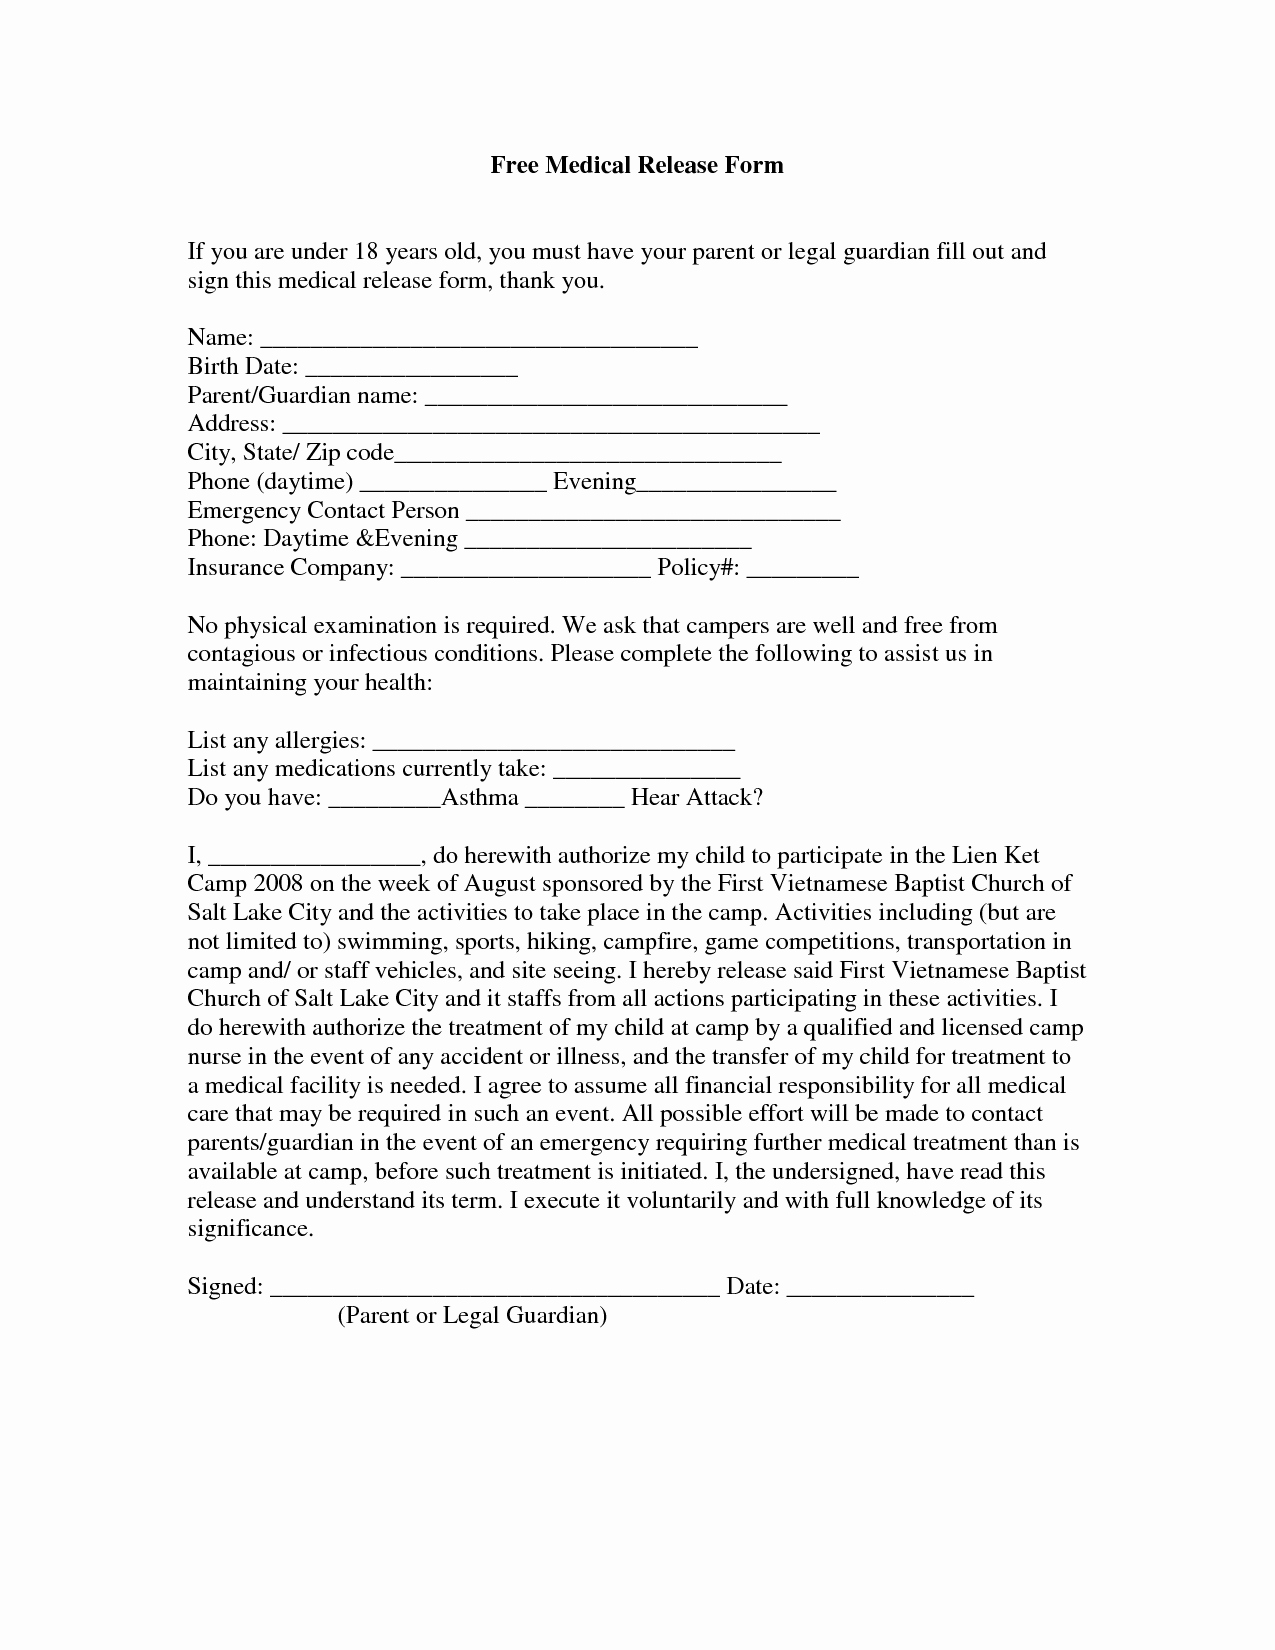 Template for Medical Release form Unique Template Printable Gallery Category Page 20